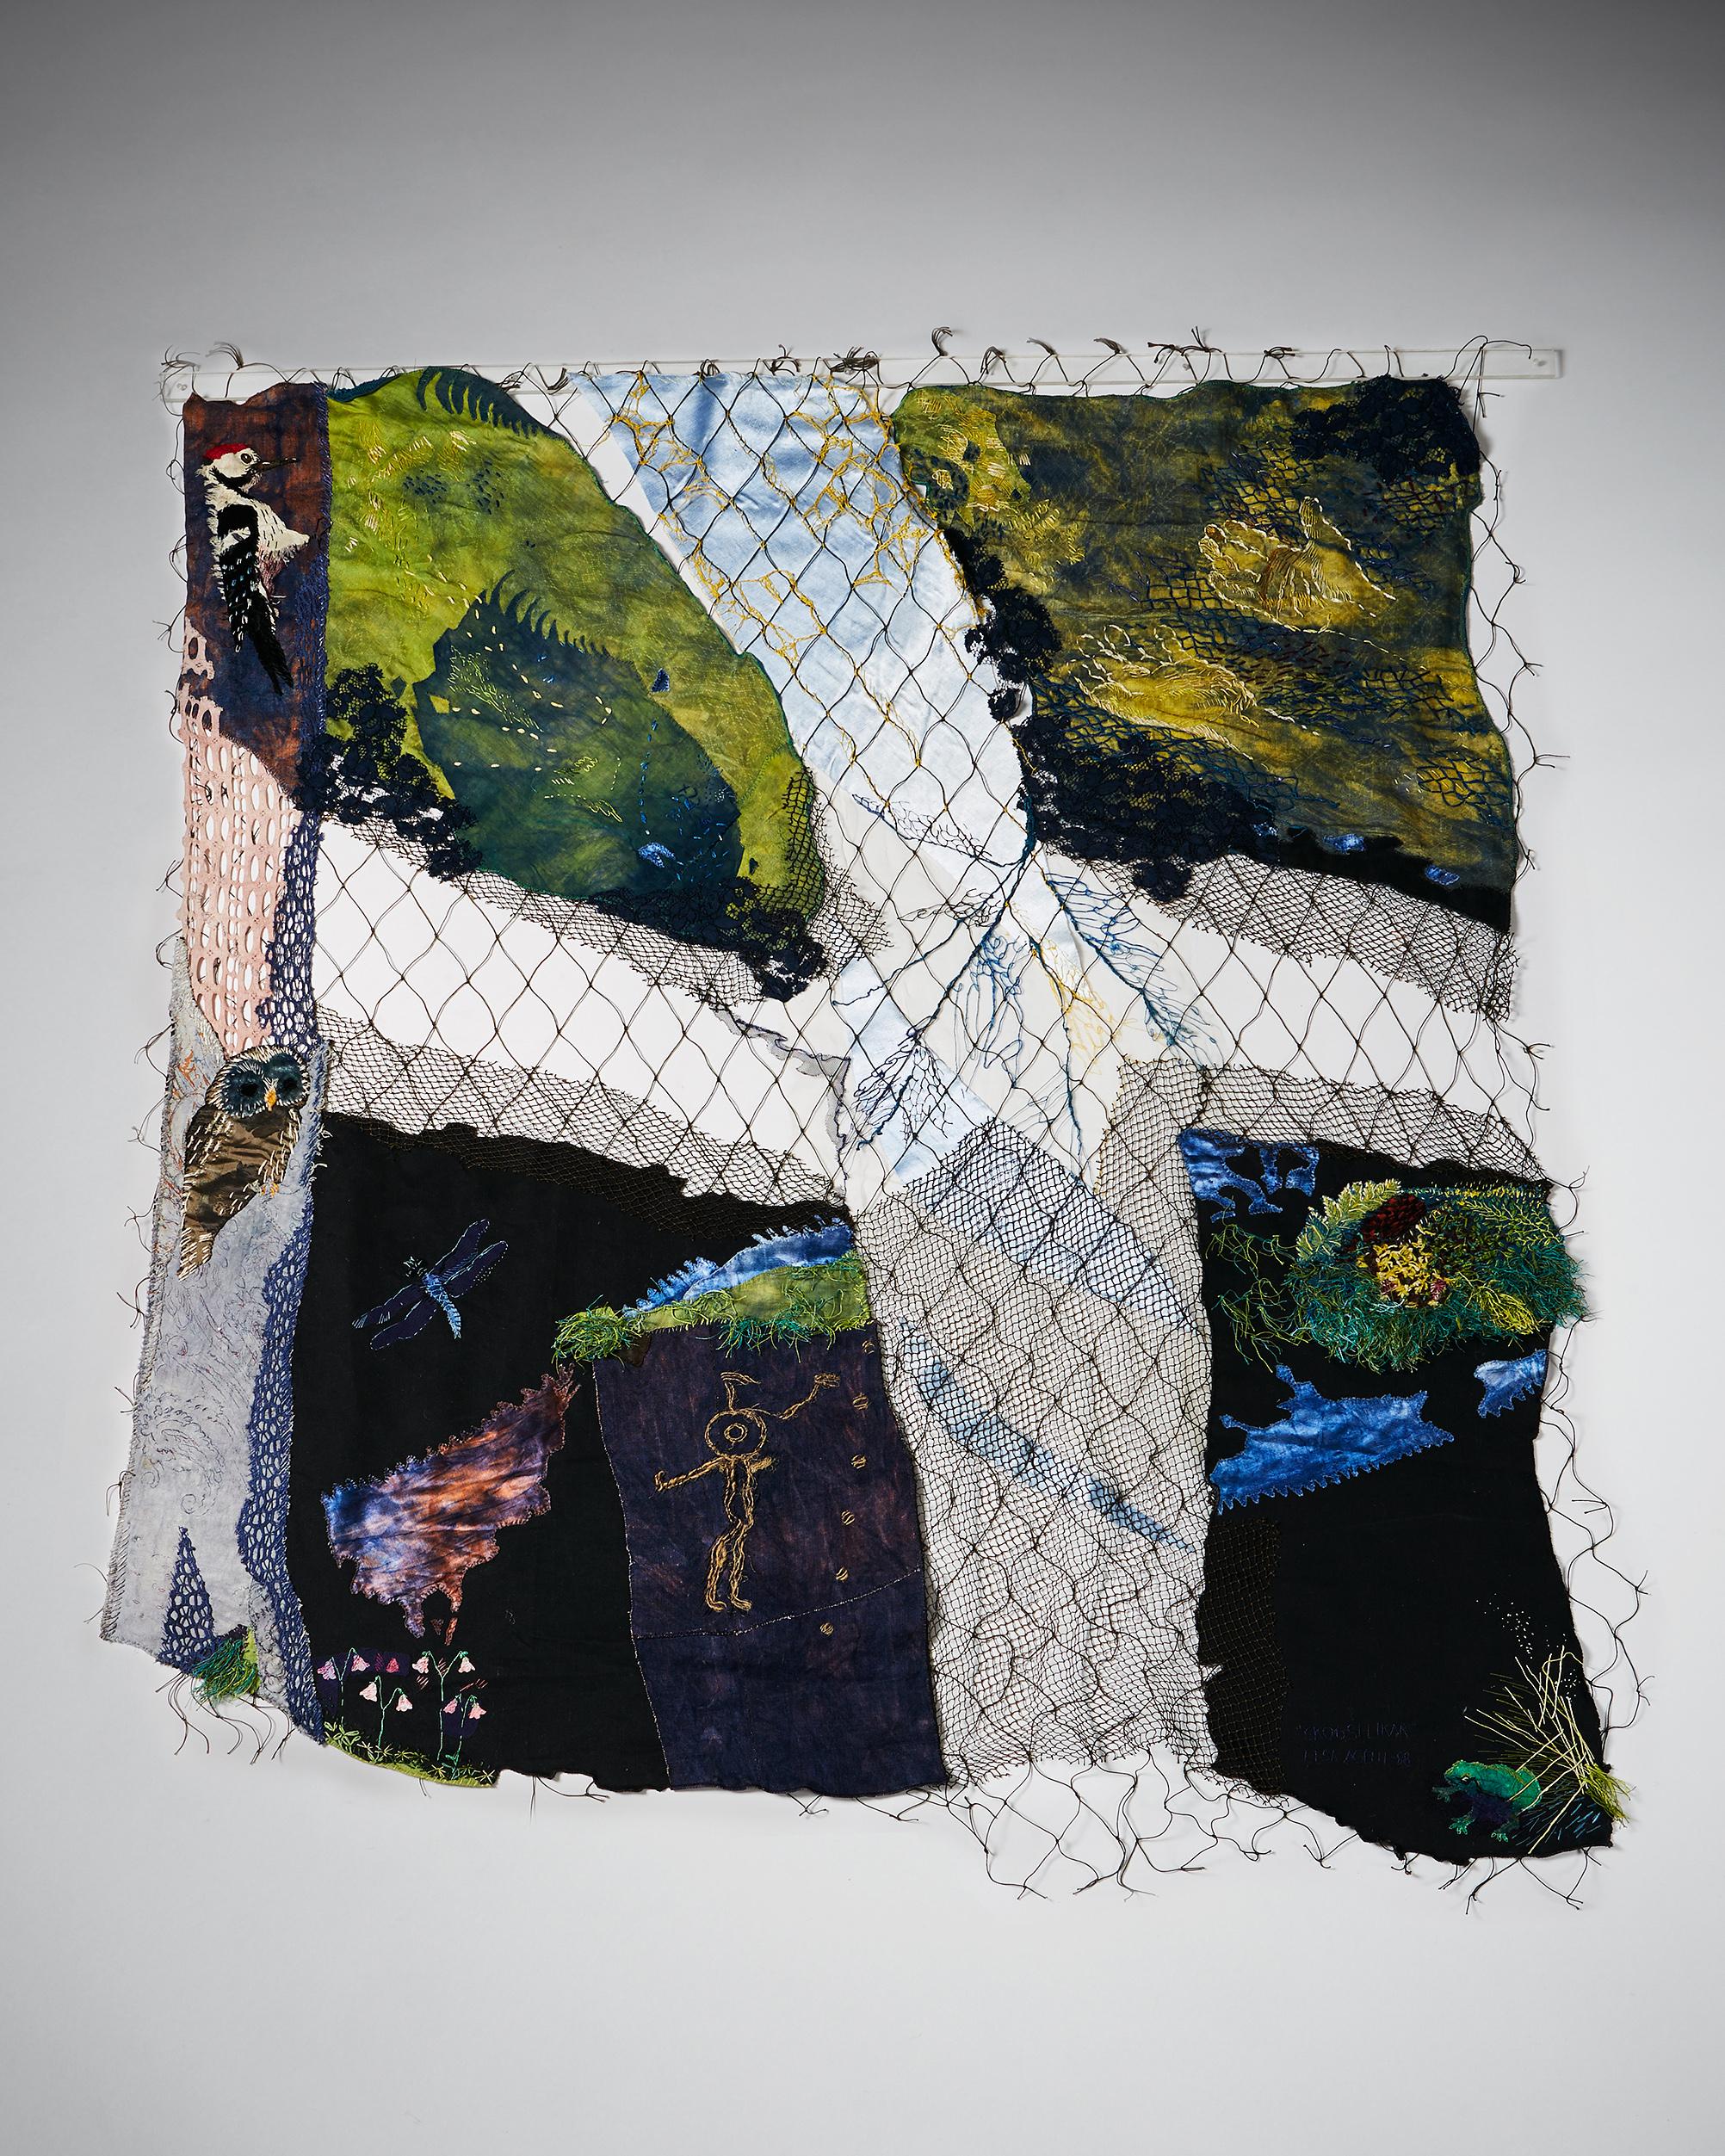 Tapestry “Forest Fragments” by Elsa Agélii,
Sweden, 1988.

Silk and mixed media.

Dimensions:
H: 155 cm/ 5' 1''
W: 135 cm/ 4' 5''
